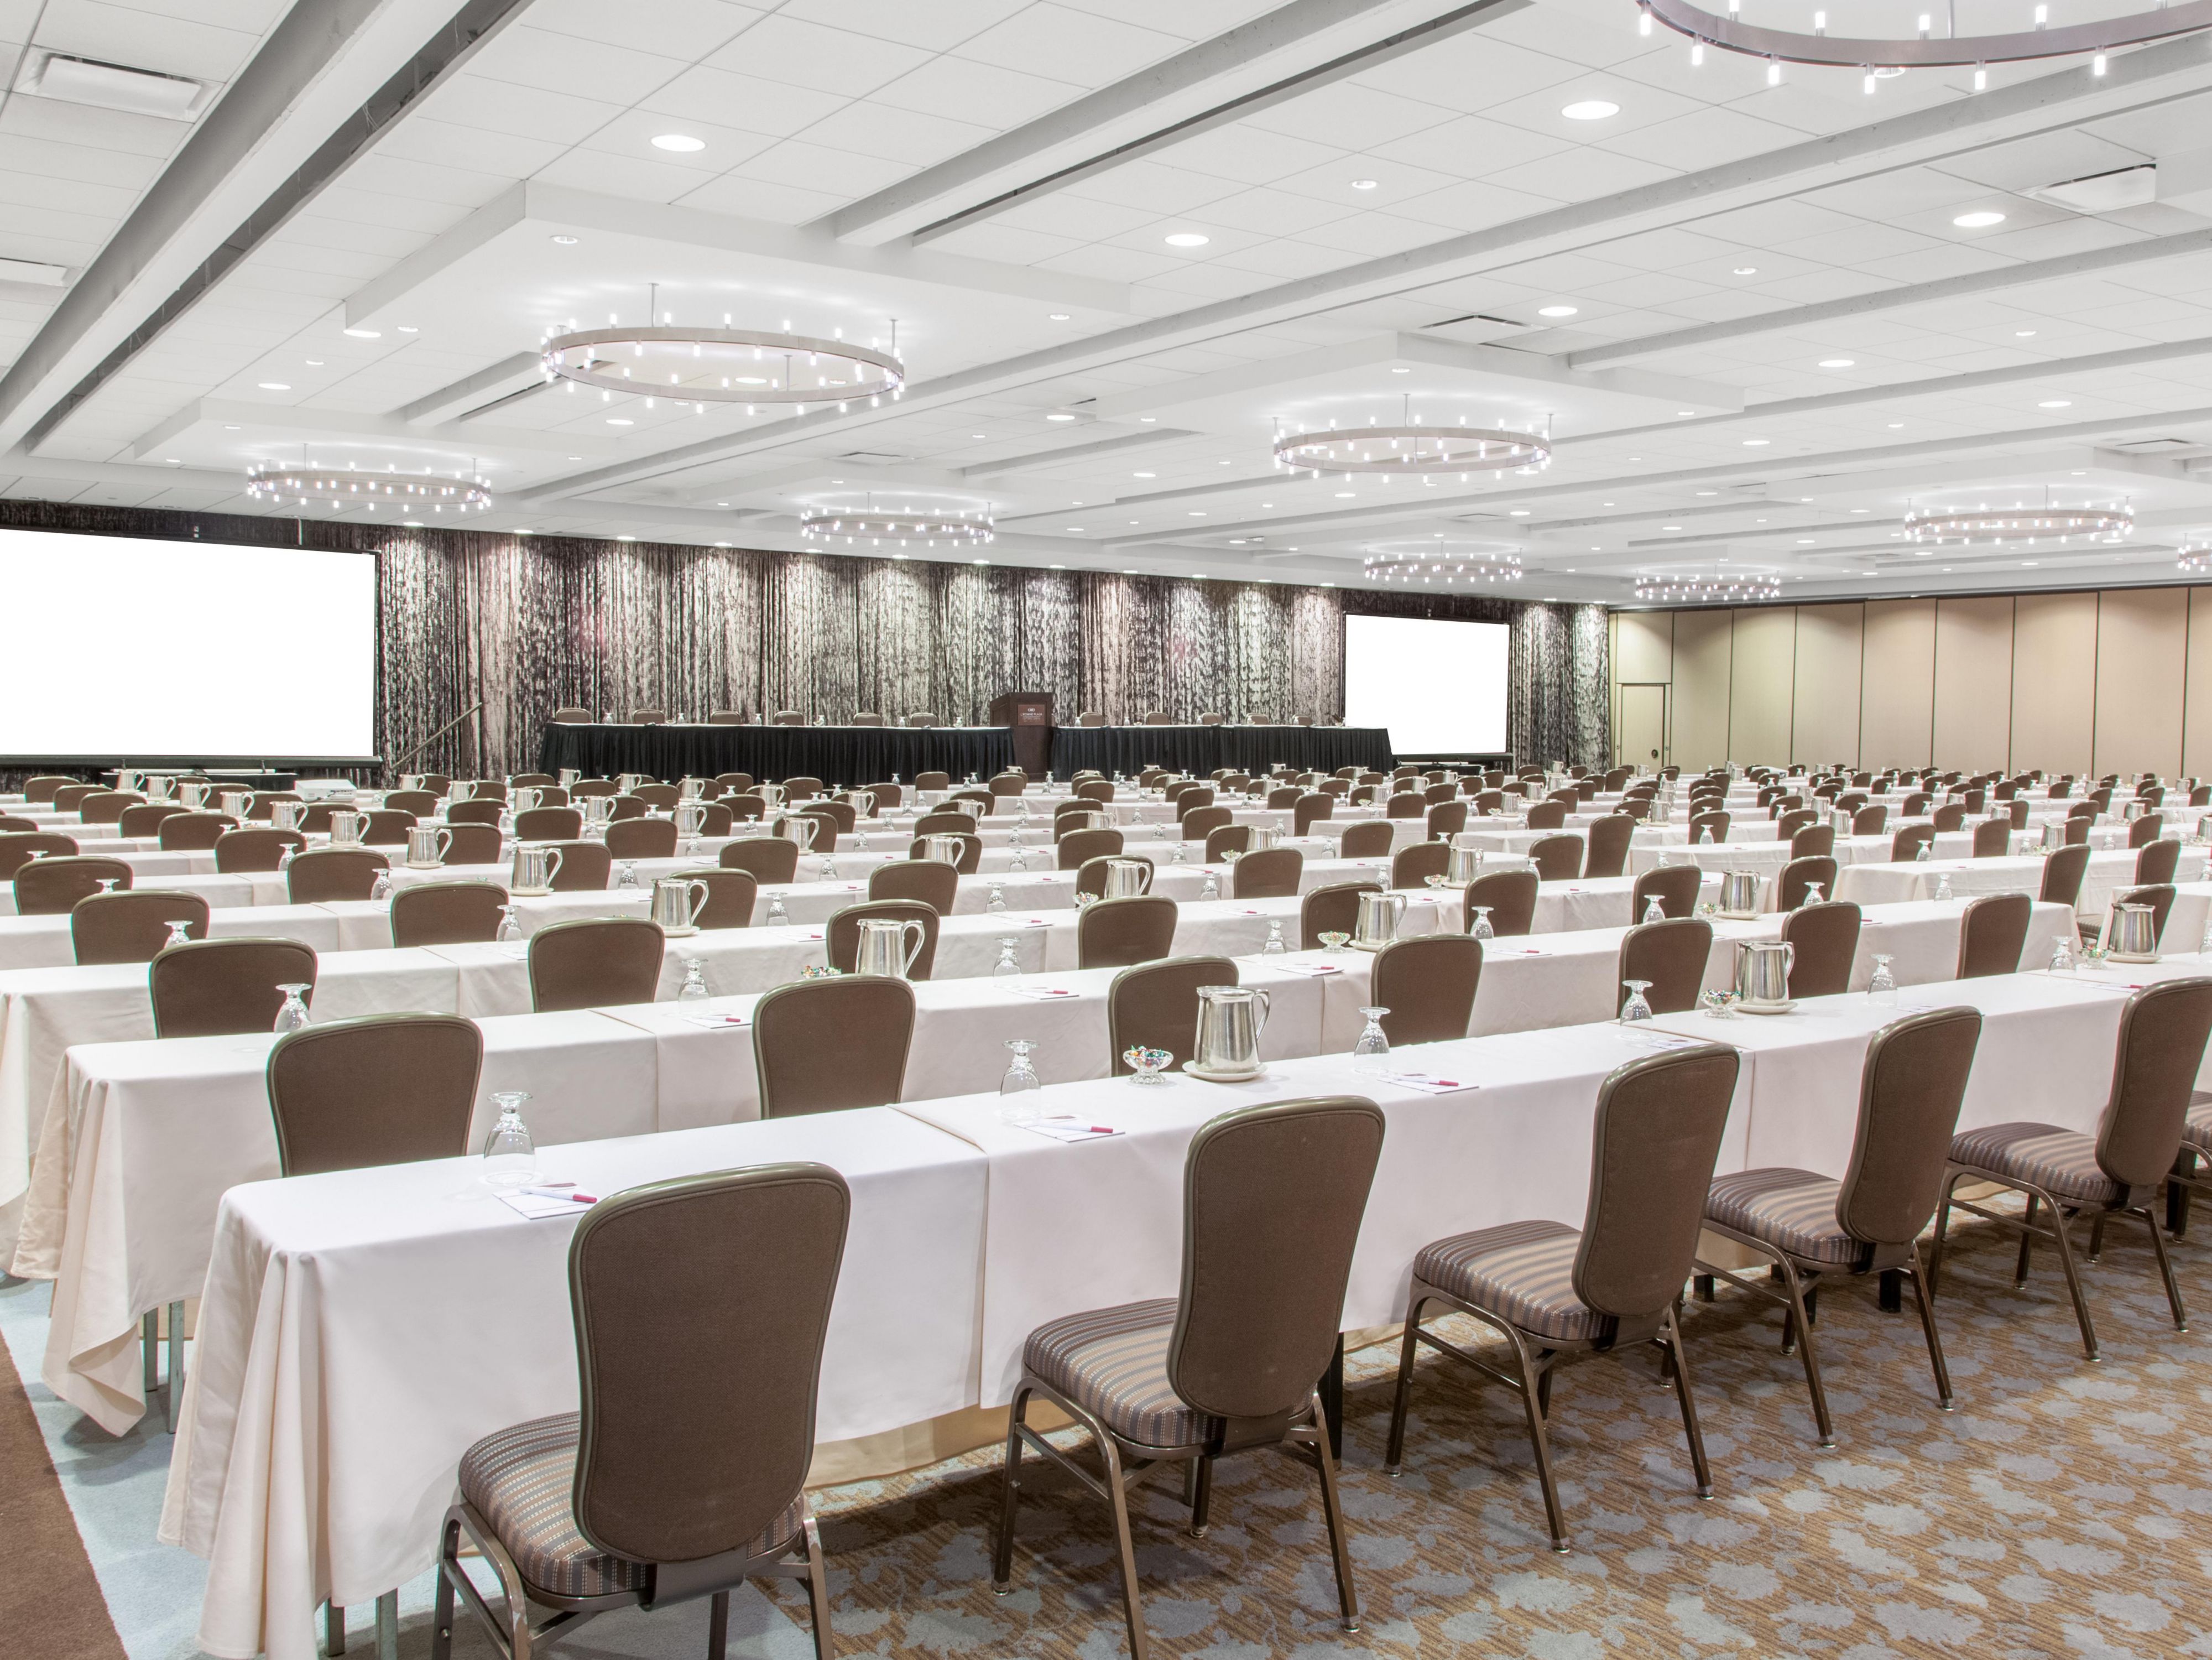 With 55,000 sq ft spread across 27 meeting rooms on two floors and a tiered amphitheater, our versatile venue is designed to accommodate events of all sizes. From intimate gatherings to government conferences, corporate meeting, and dream weddings, we have the perfect space for you.